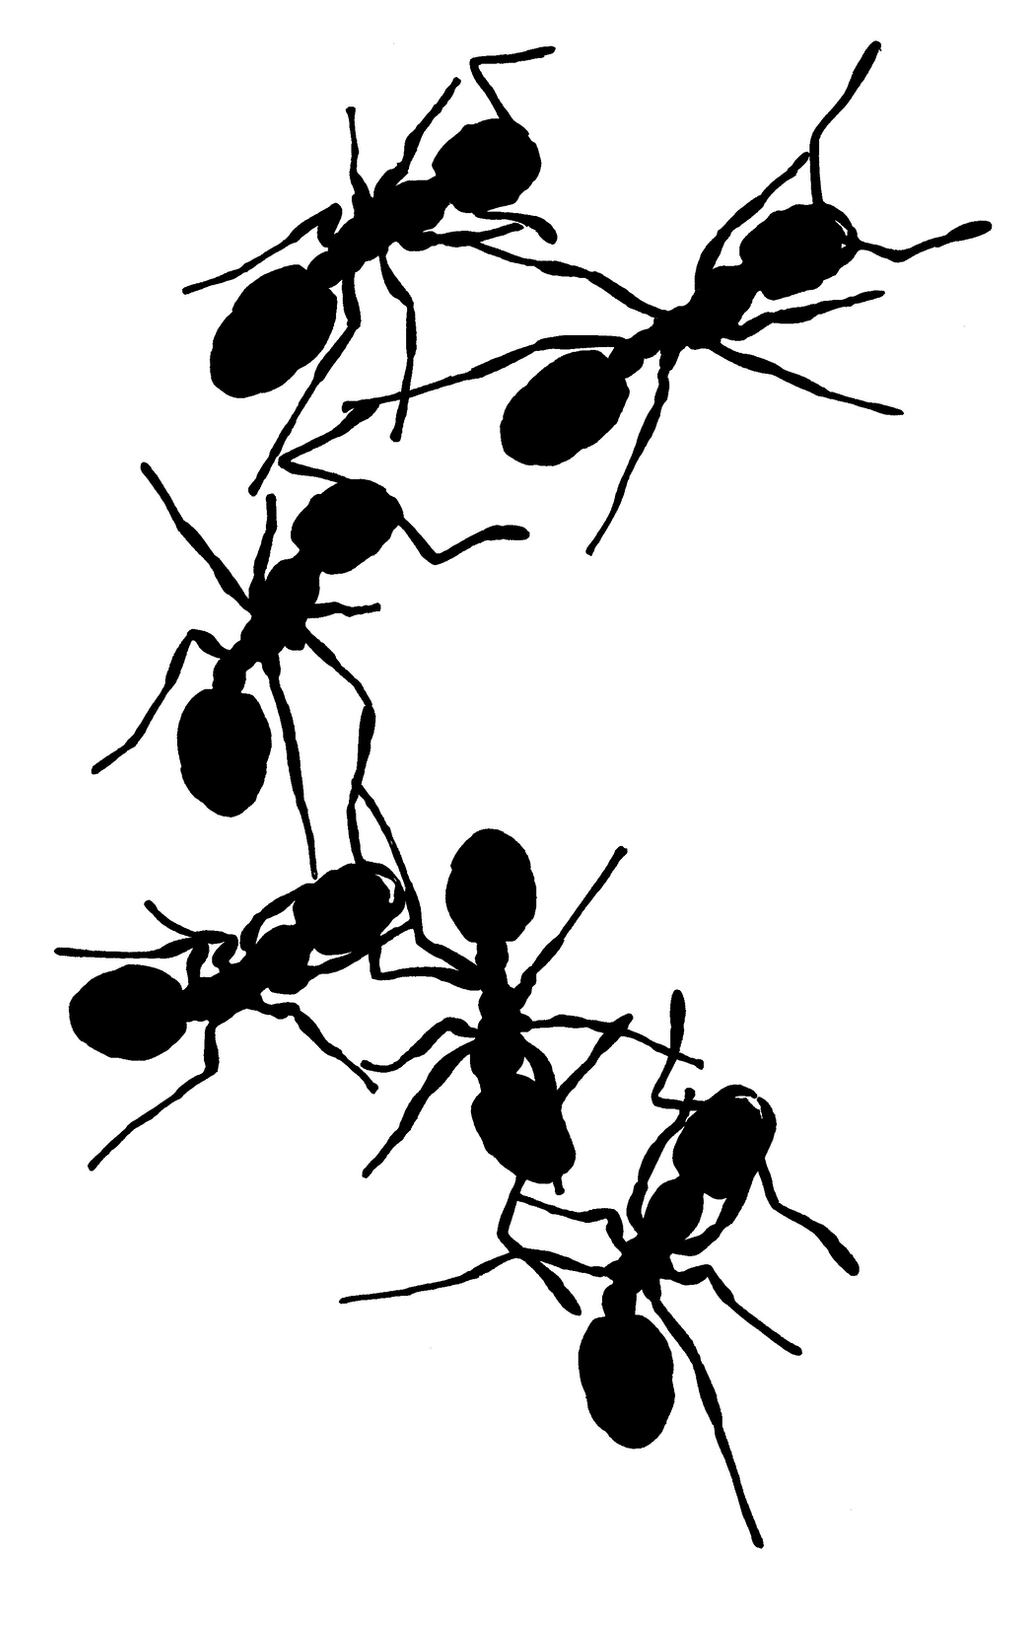 queen ant clipart - photo #36